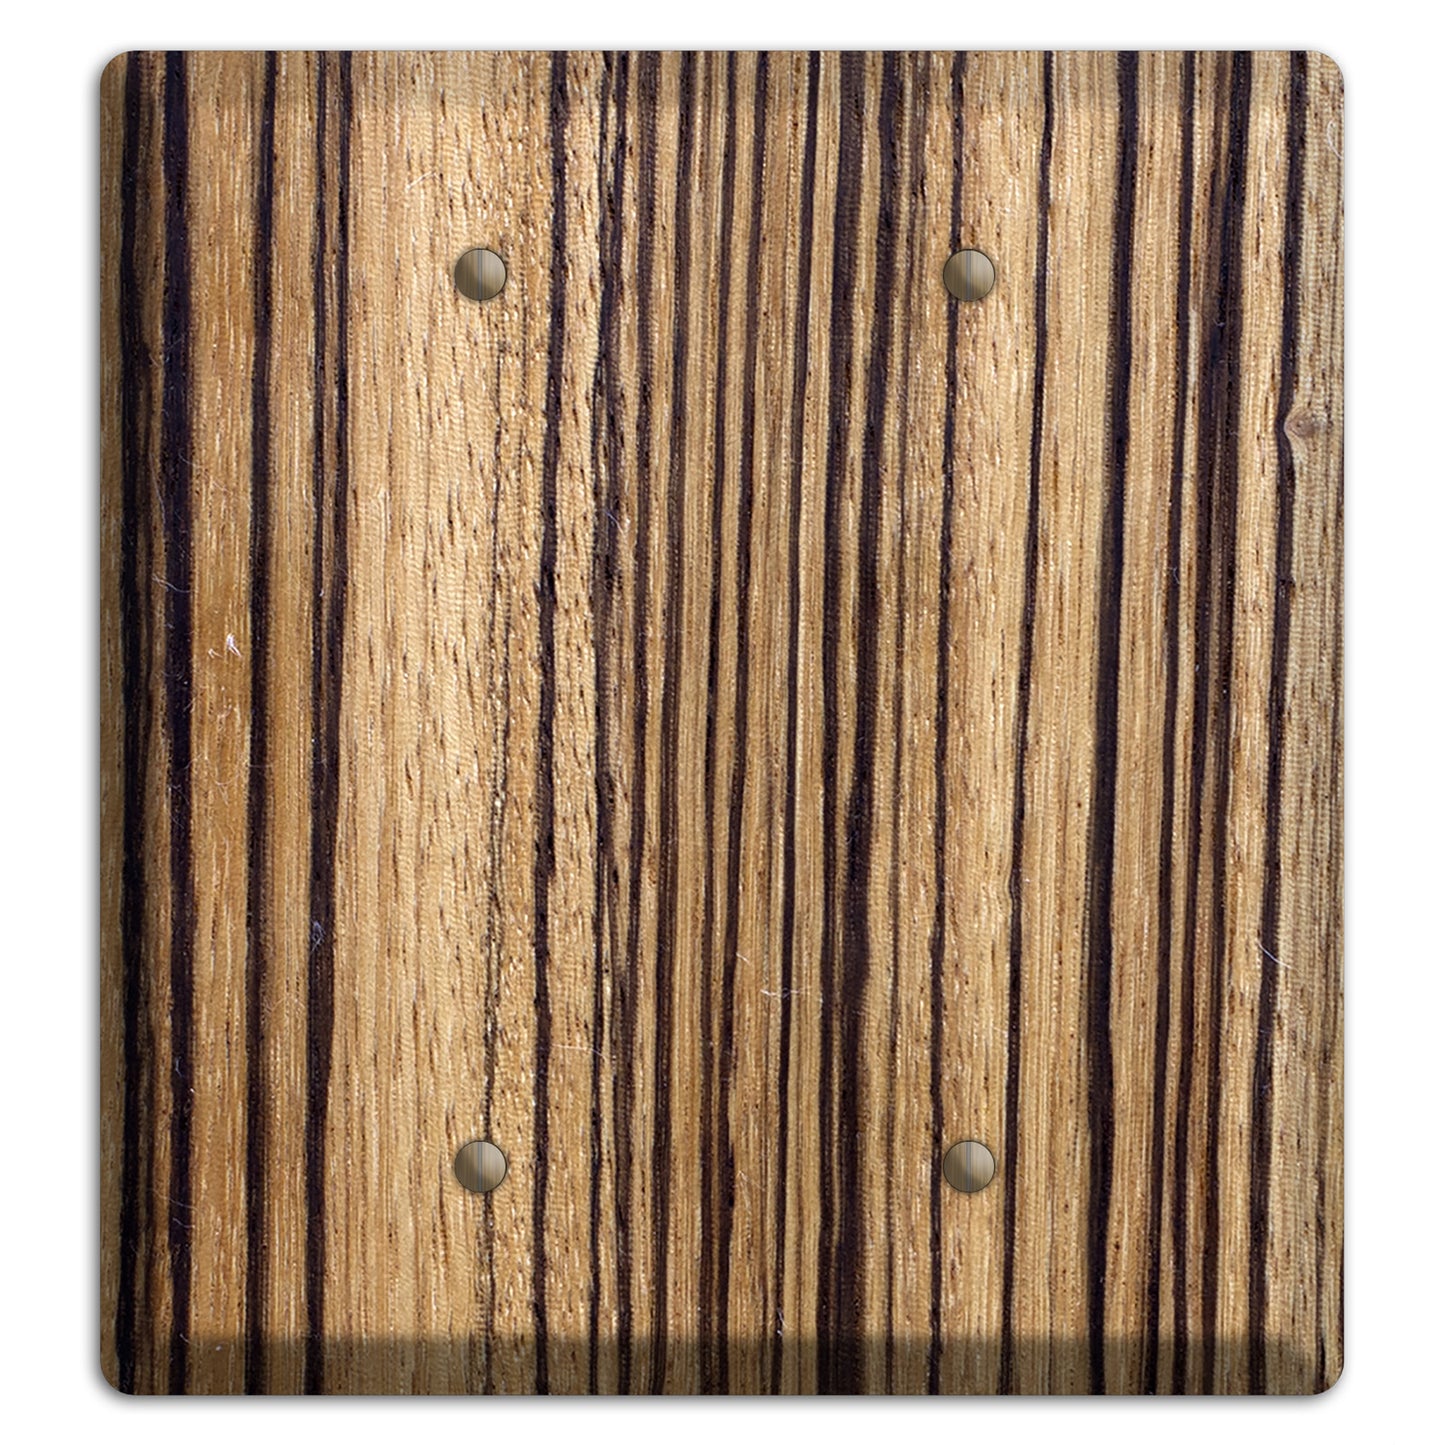 Zebrawood Wood Double Blank Cover Plate